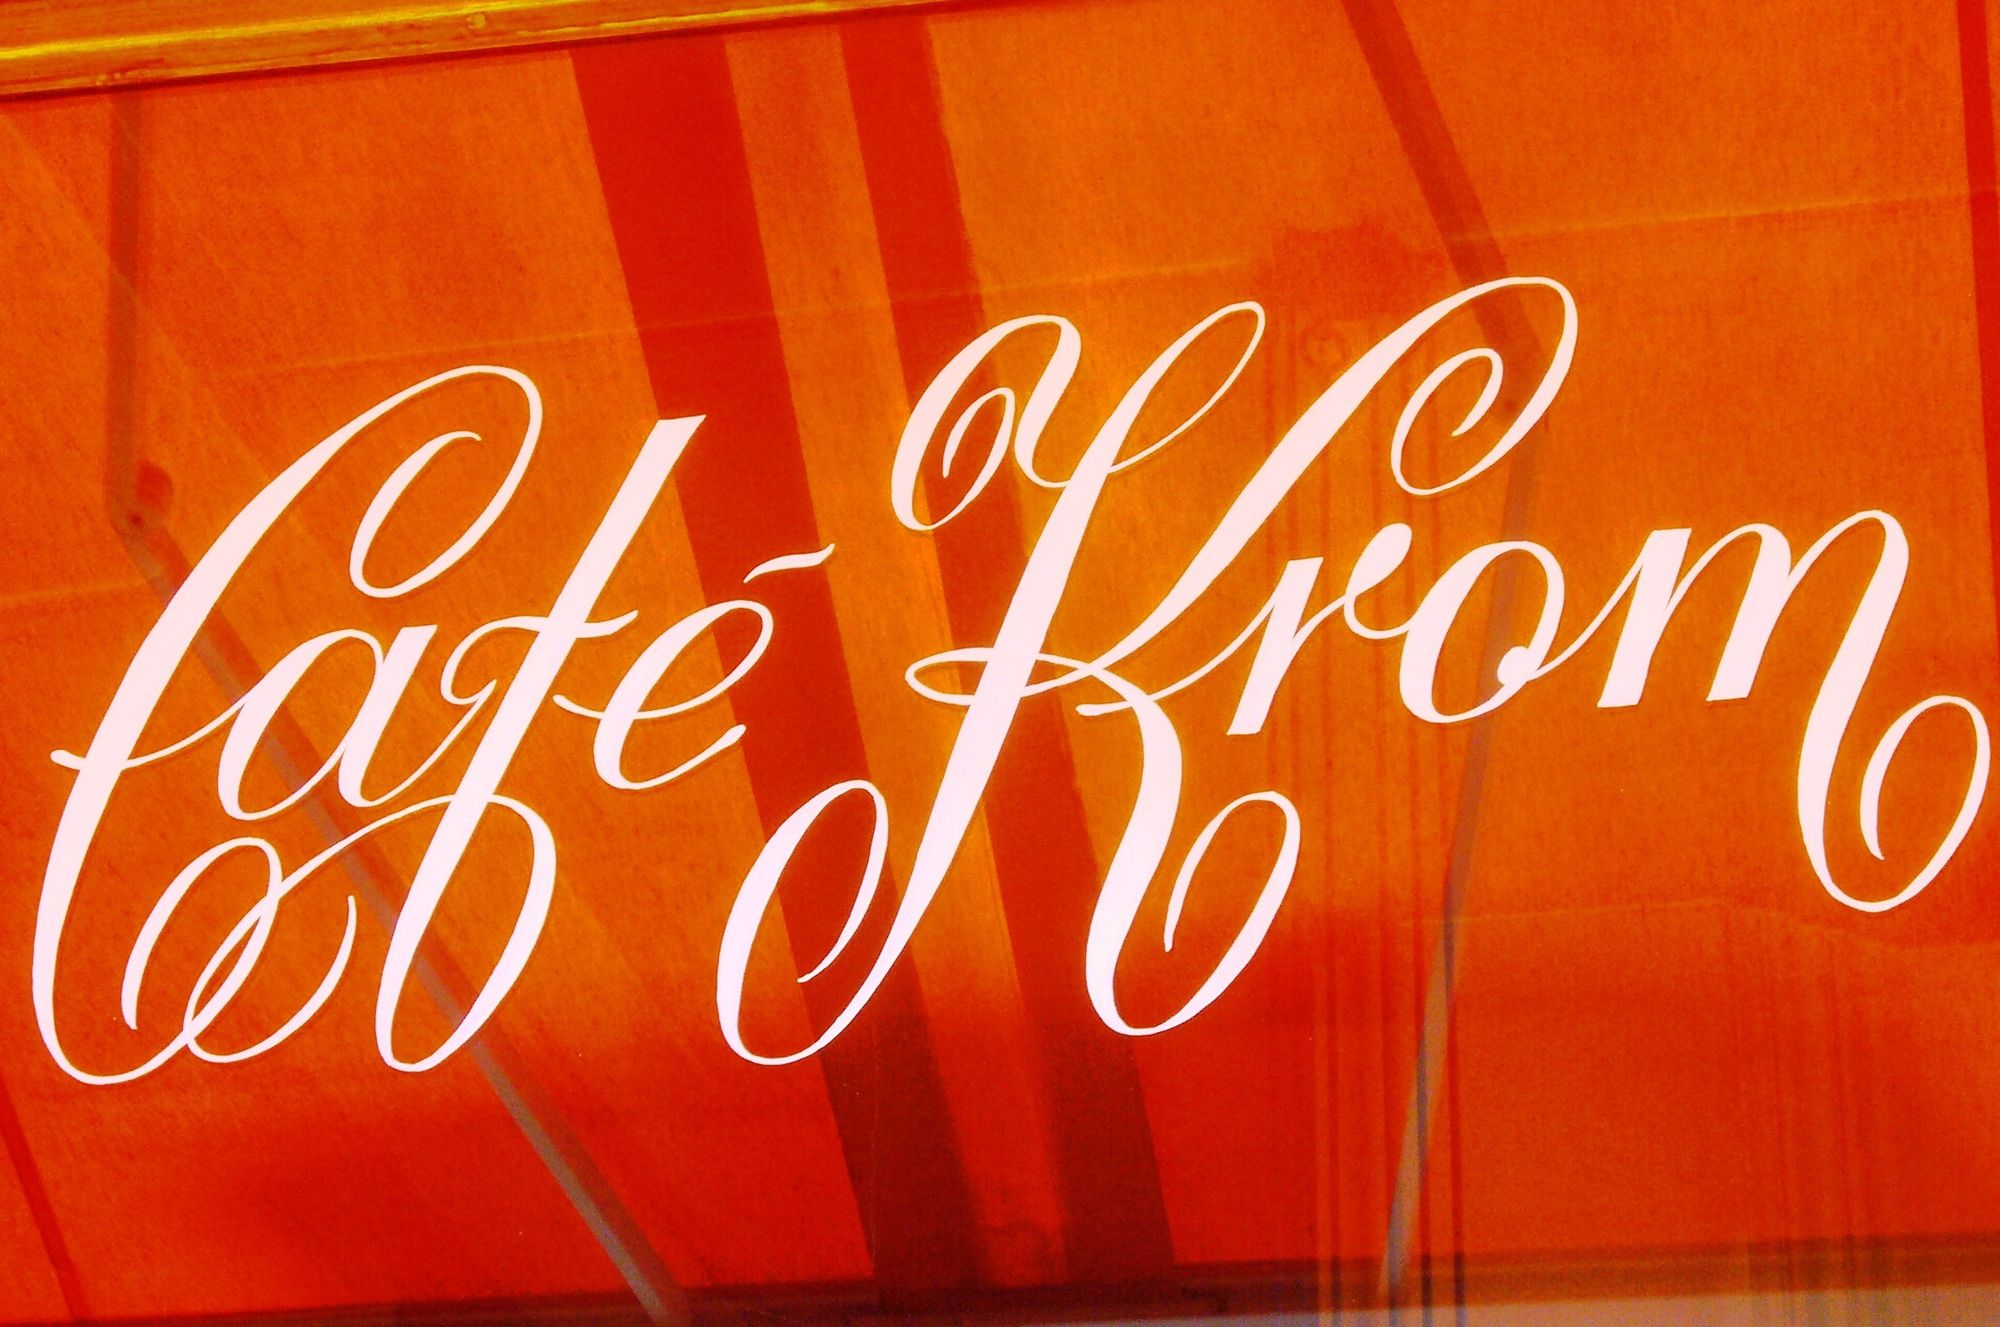 Sign painted in white by hand on a glass window reflecting an orange awning.